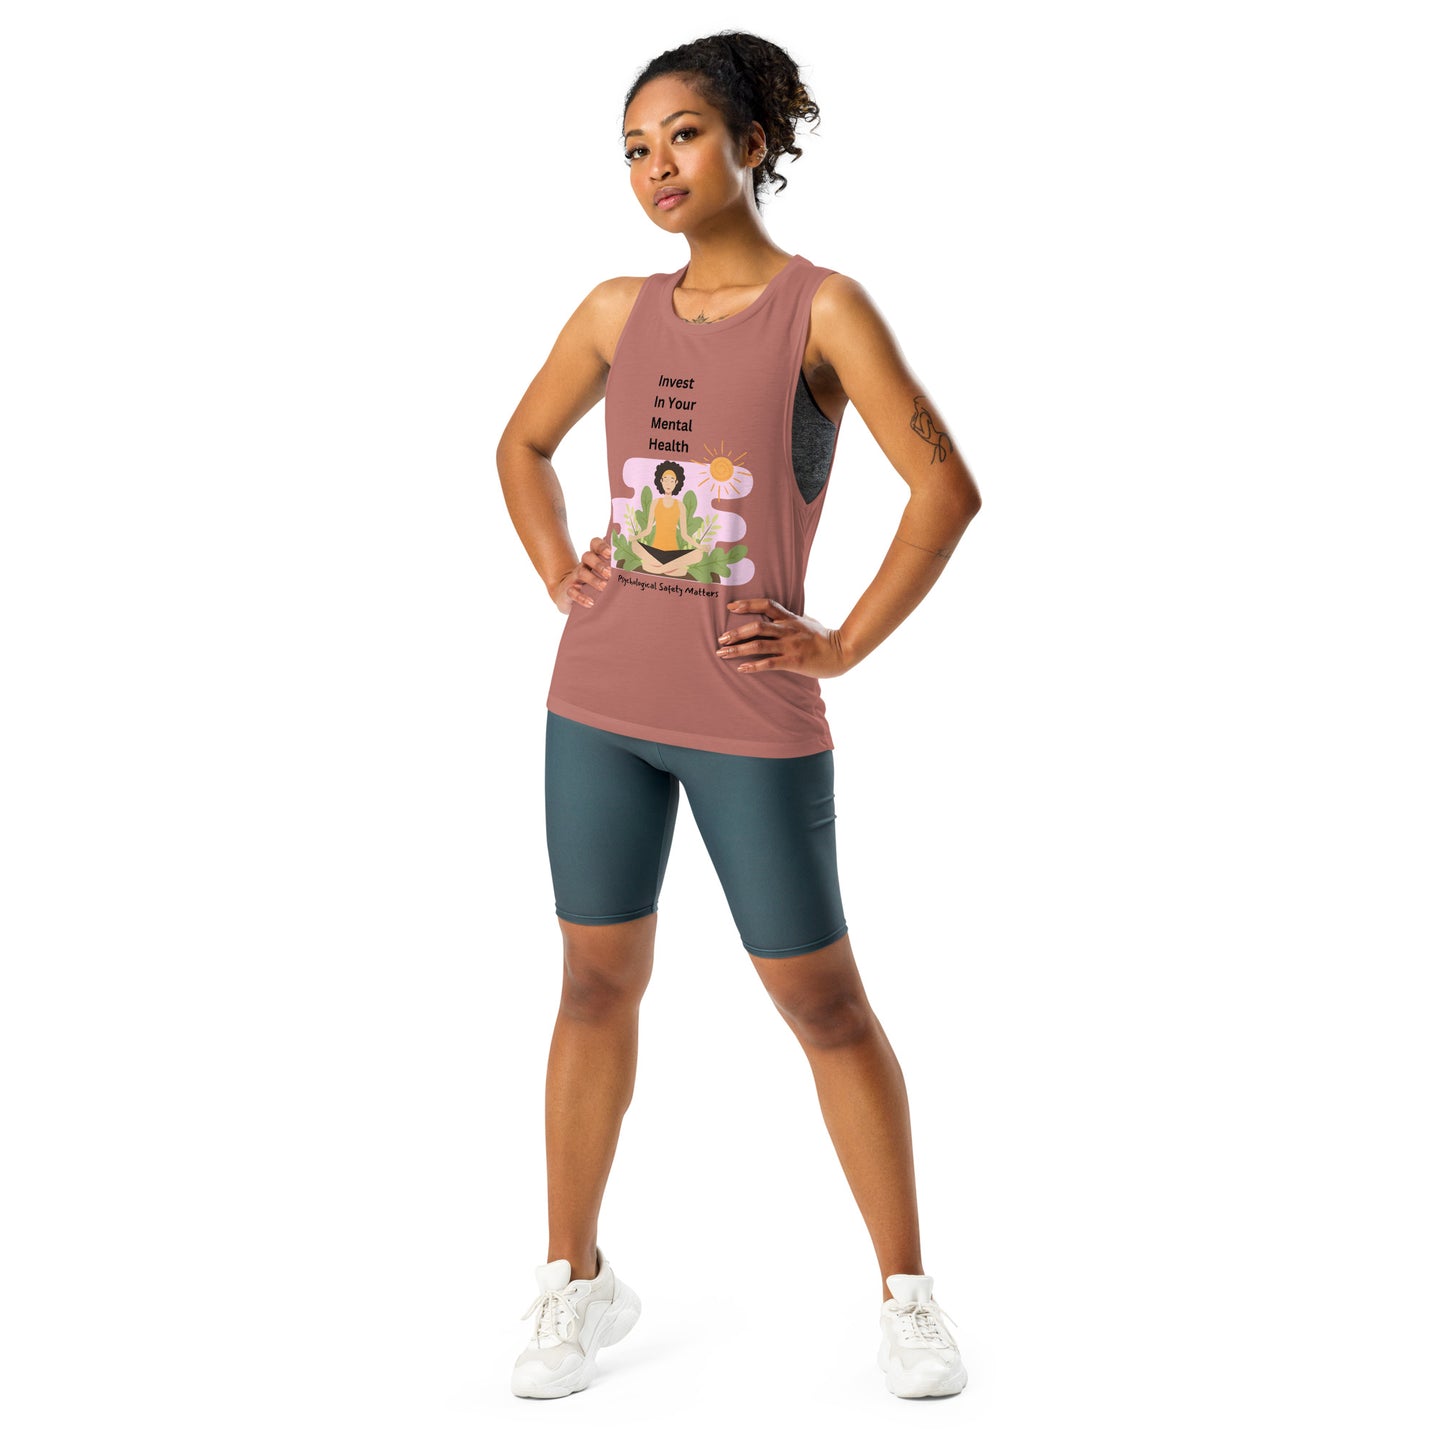 Invest in your mental health Ladies’ Muscle Tank